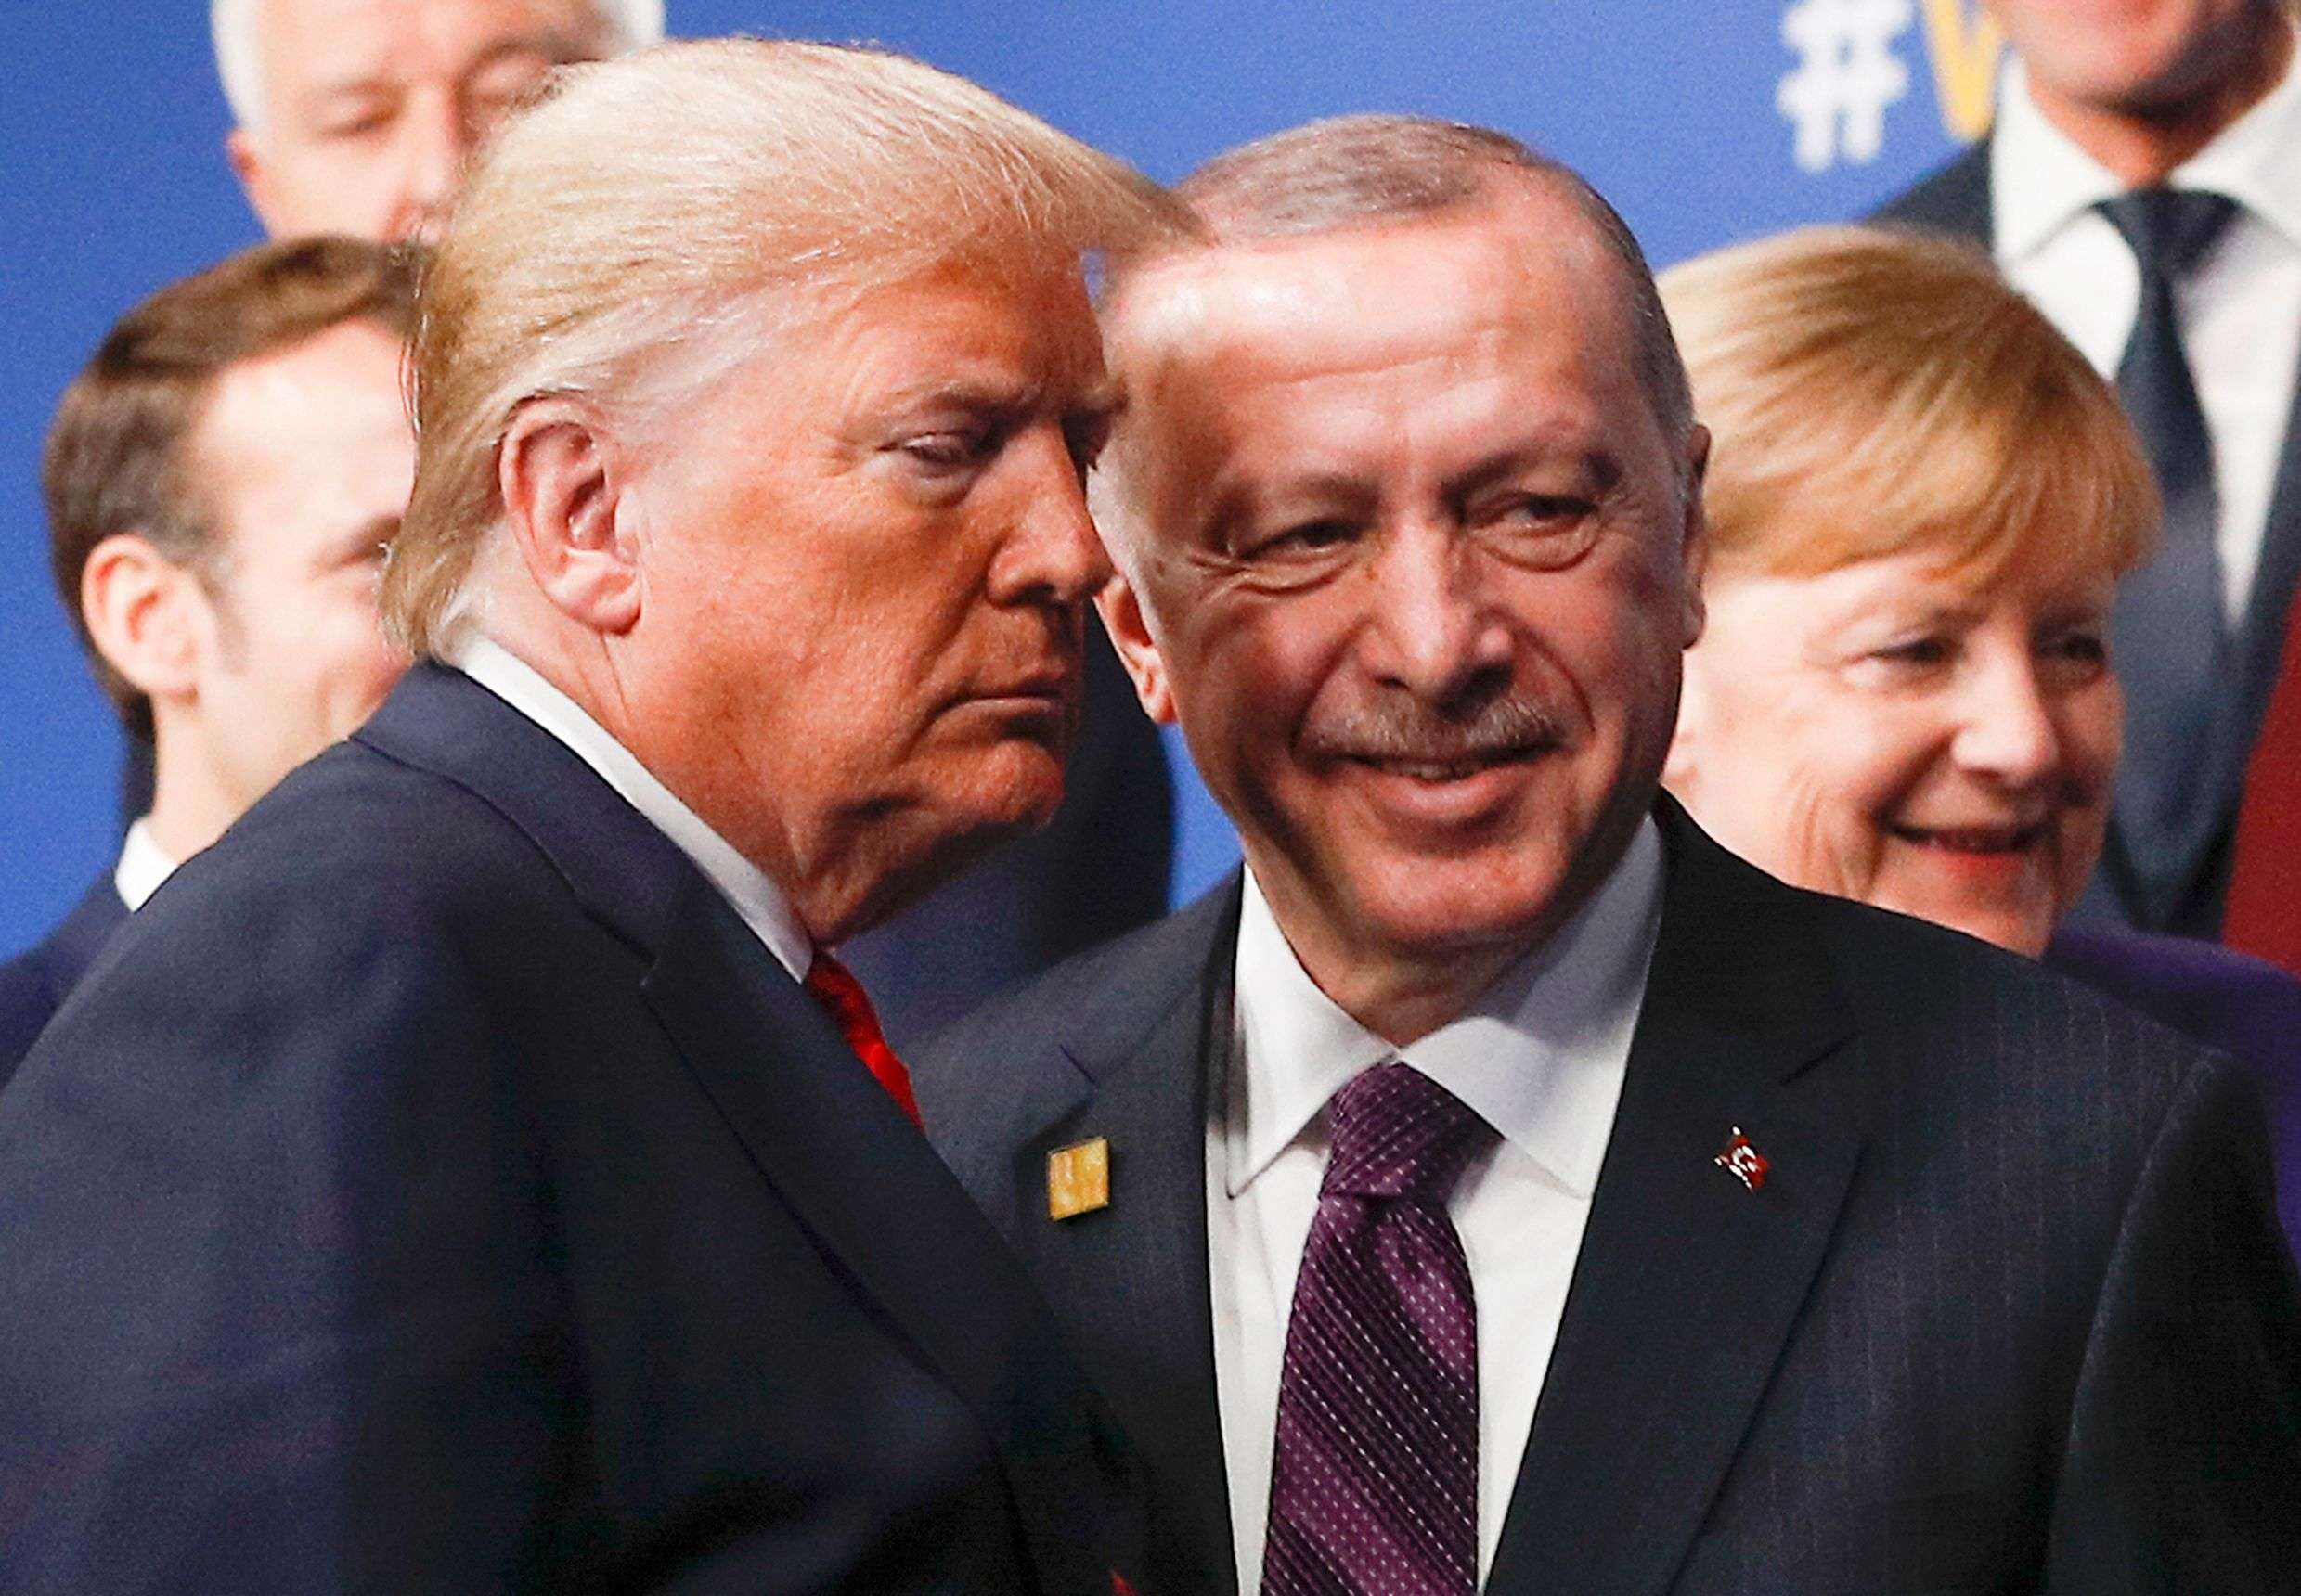 Erdogan’s Turkey envisions a once-in-a-lifetime opportunity to revive its old empire with the support of Islamist soulmates across the Middle East